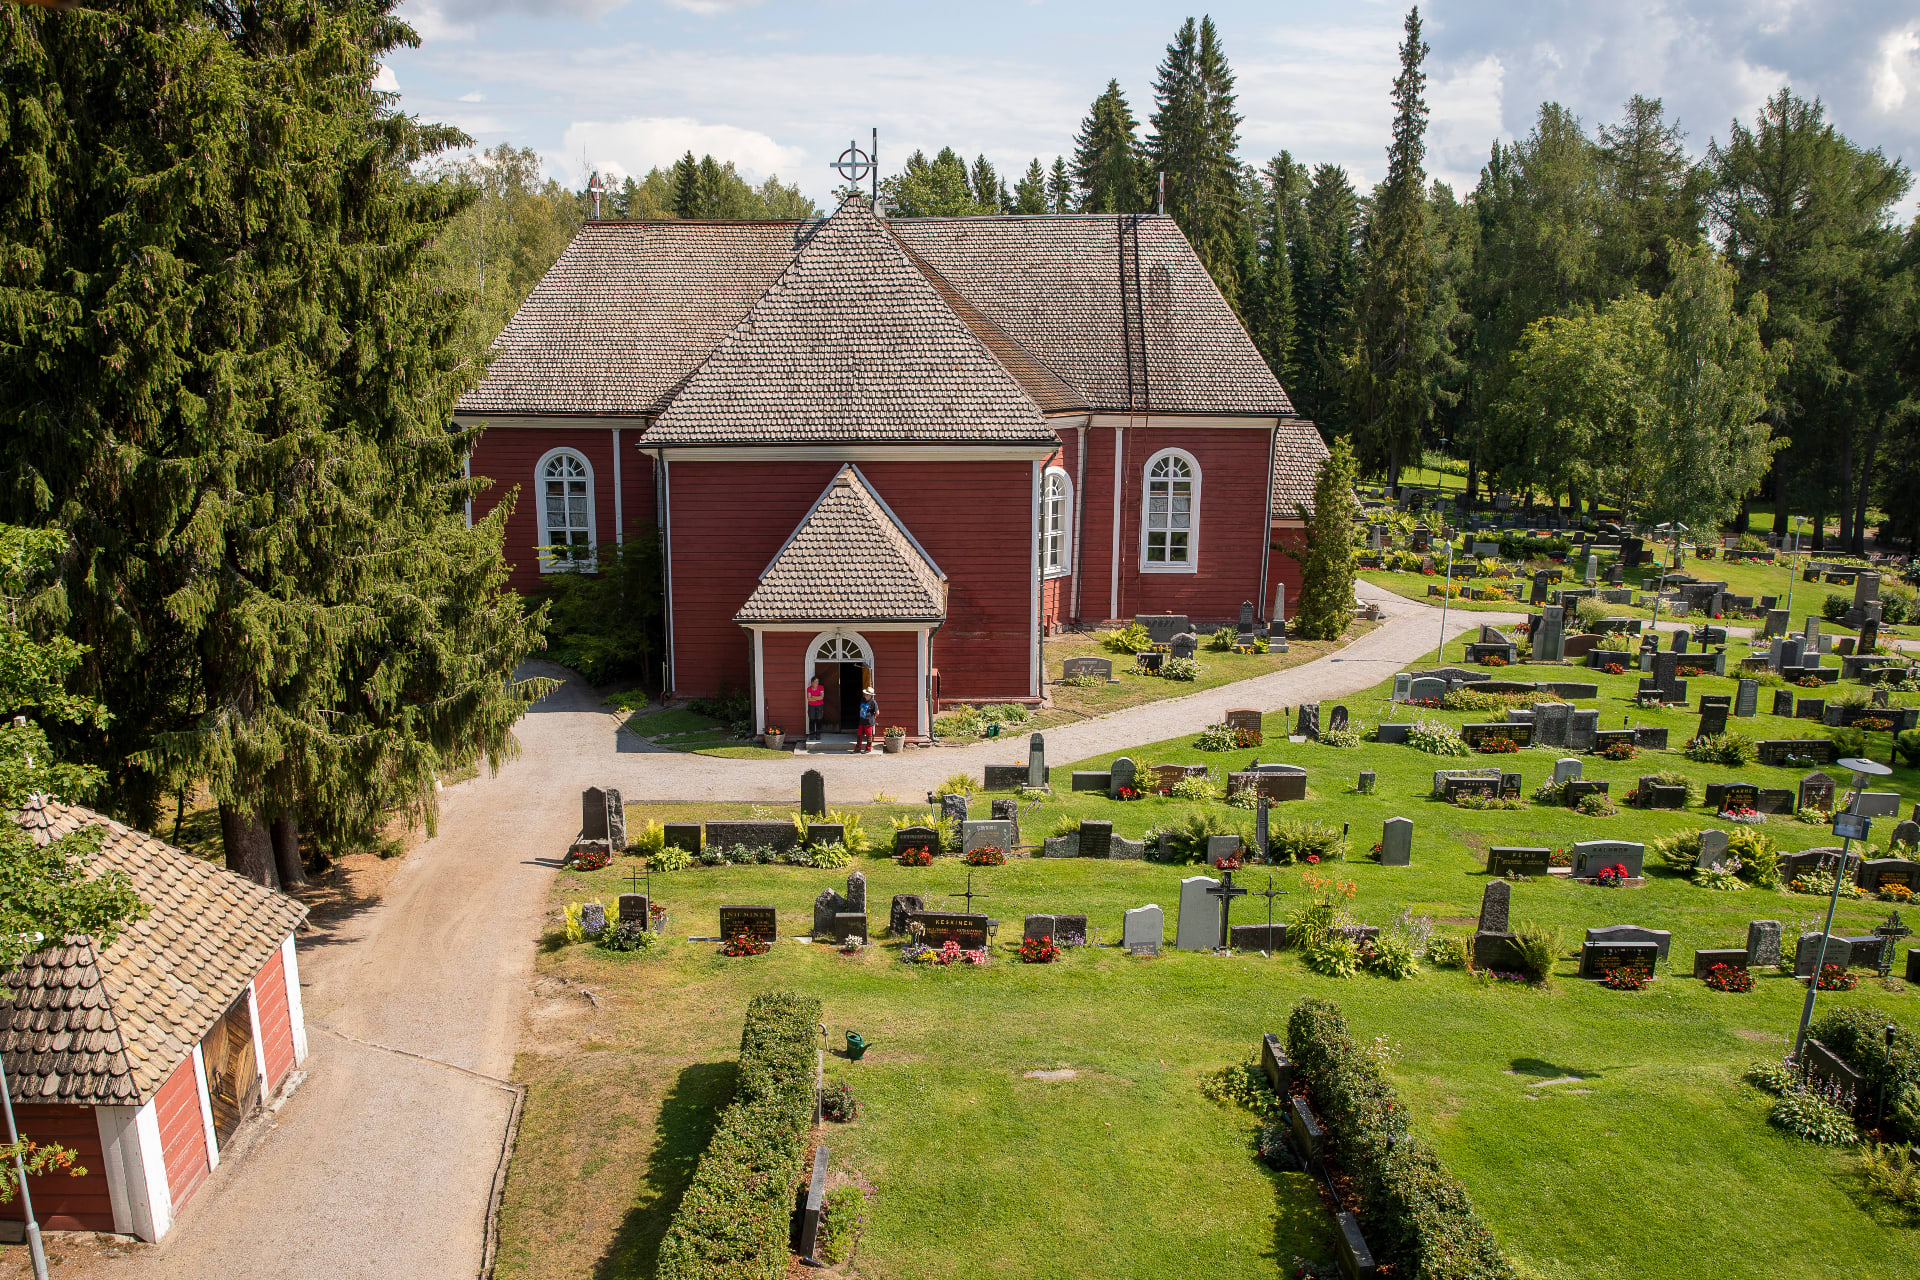 Teisko cemetery is located right next to the church.